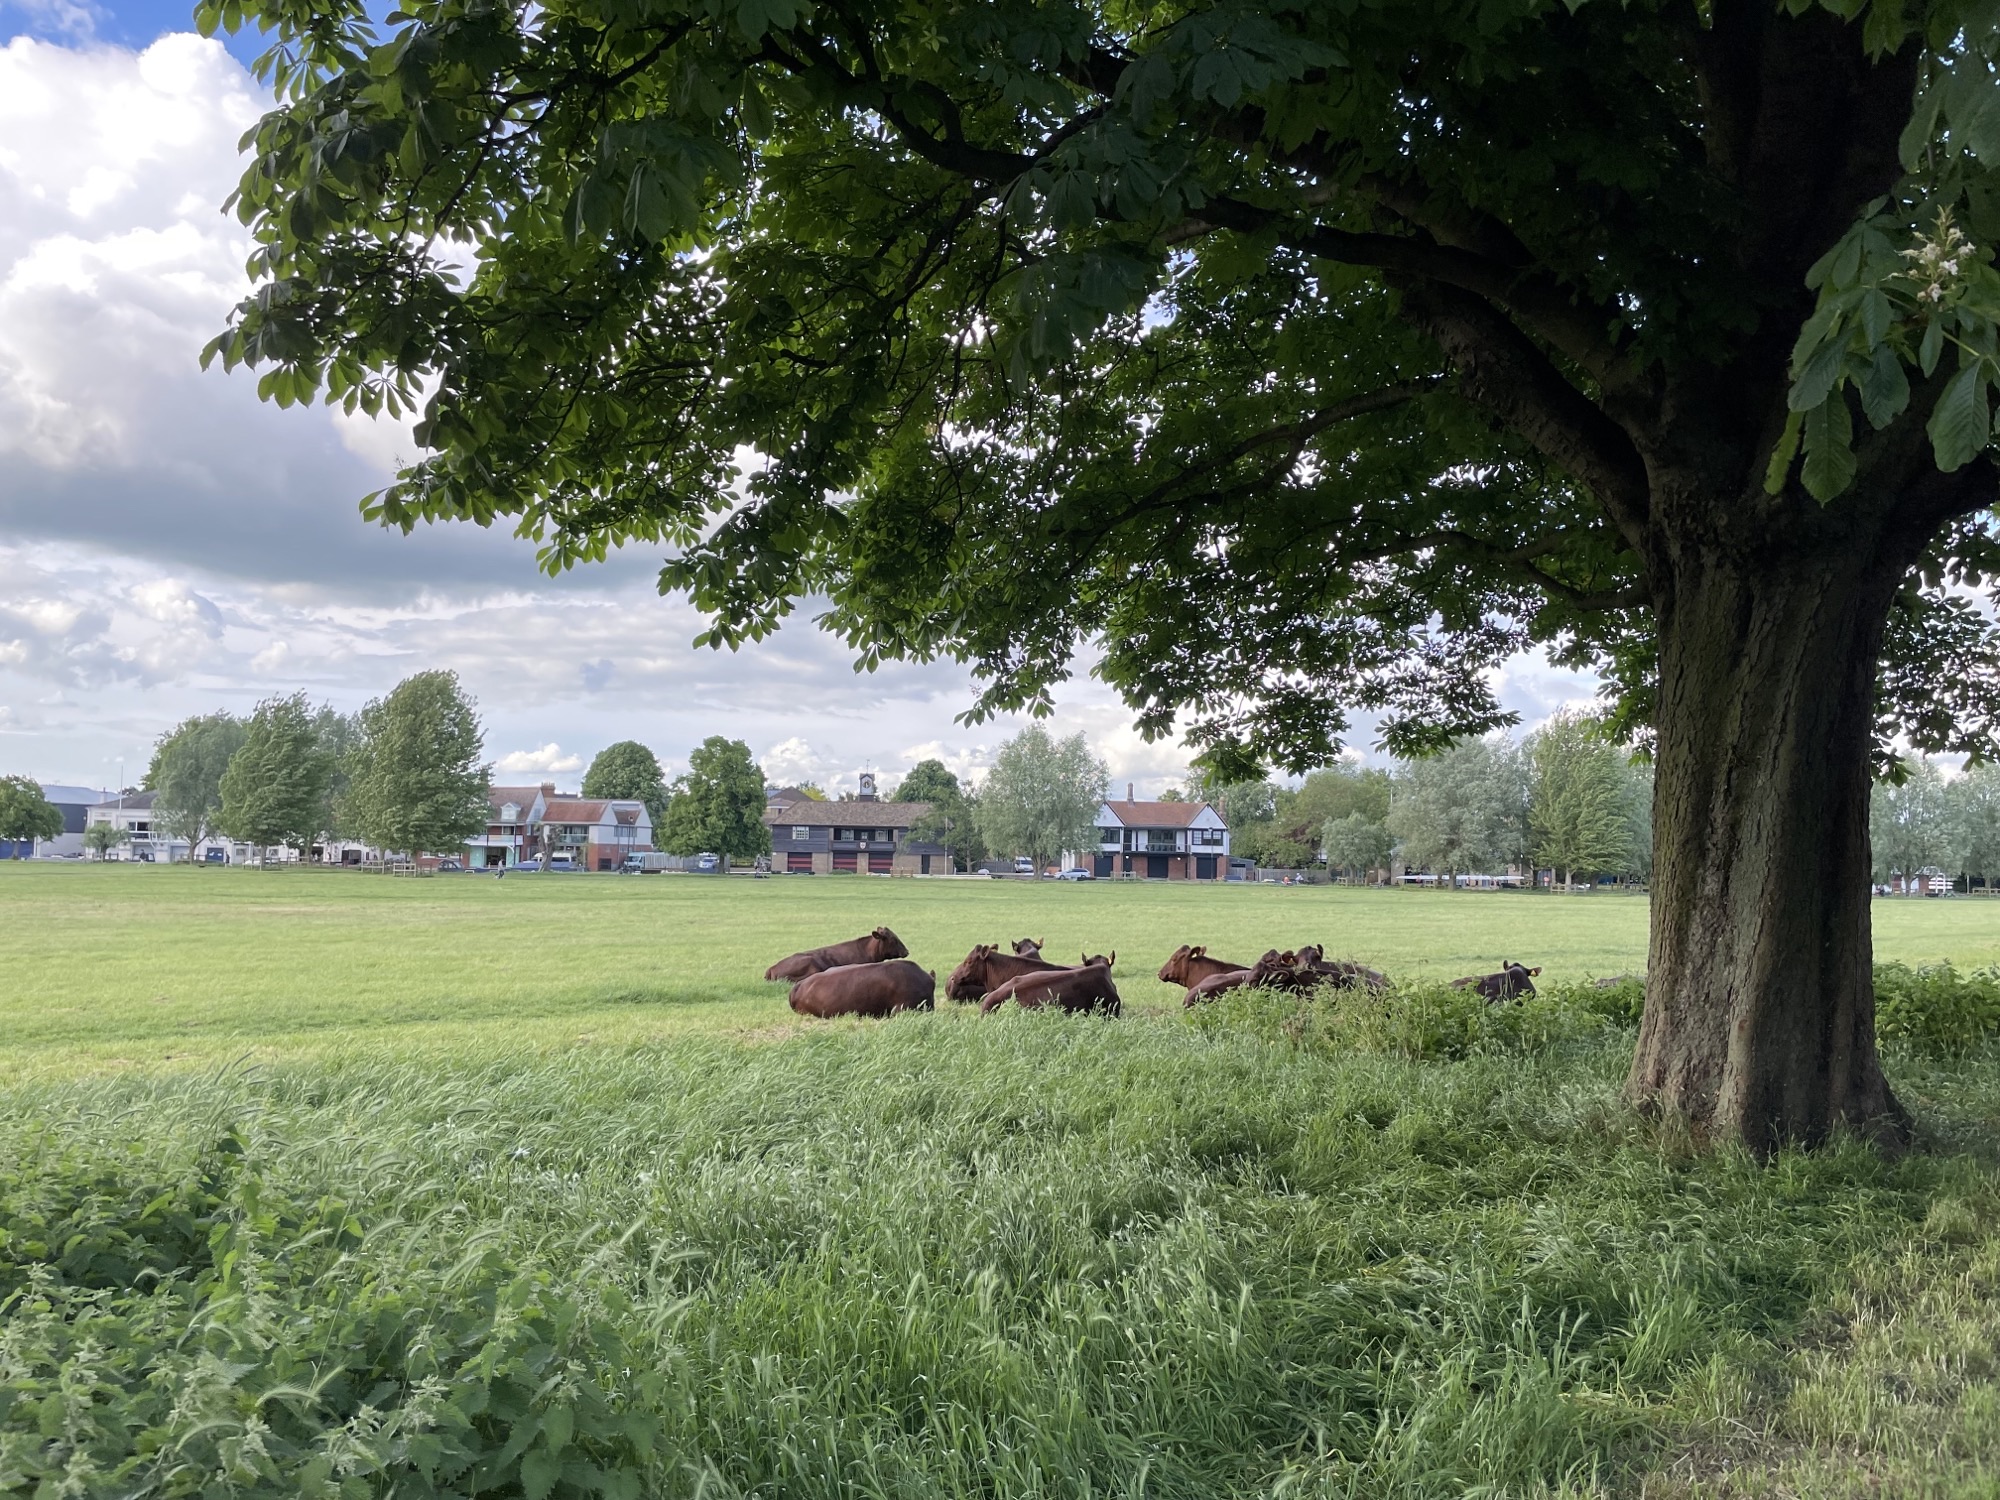 Some brown cows lying under a tree, with boathouses in the background